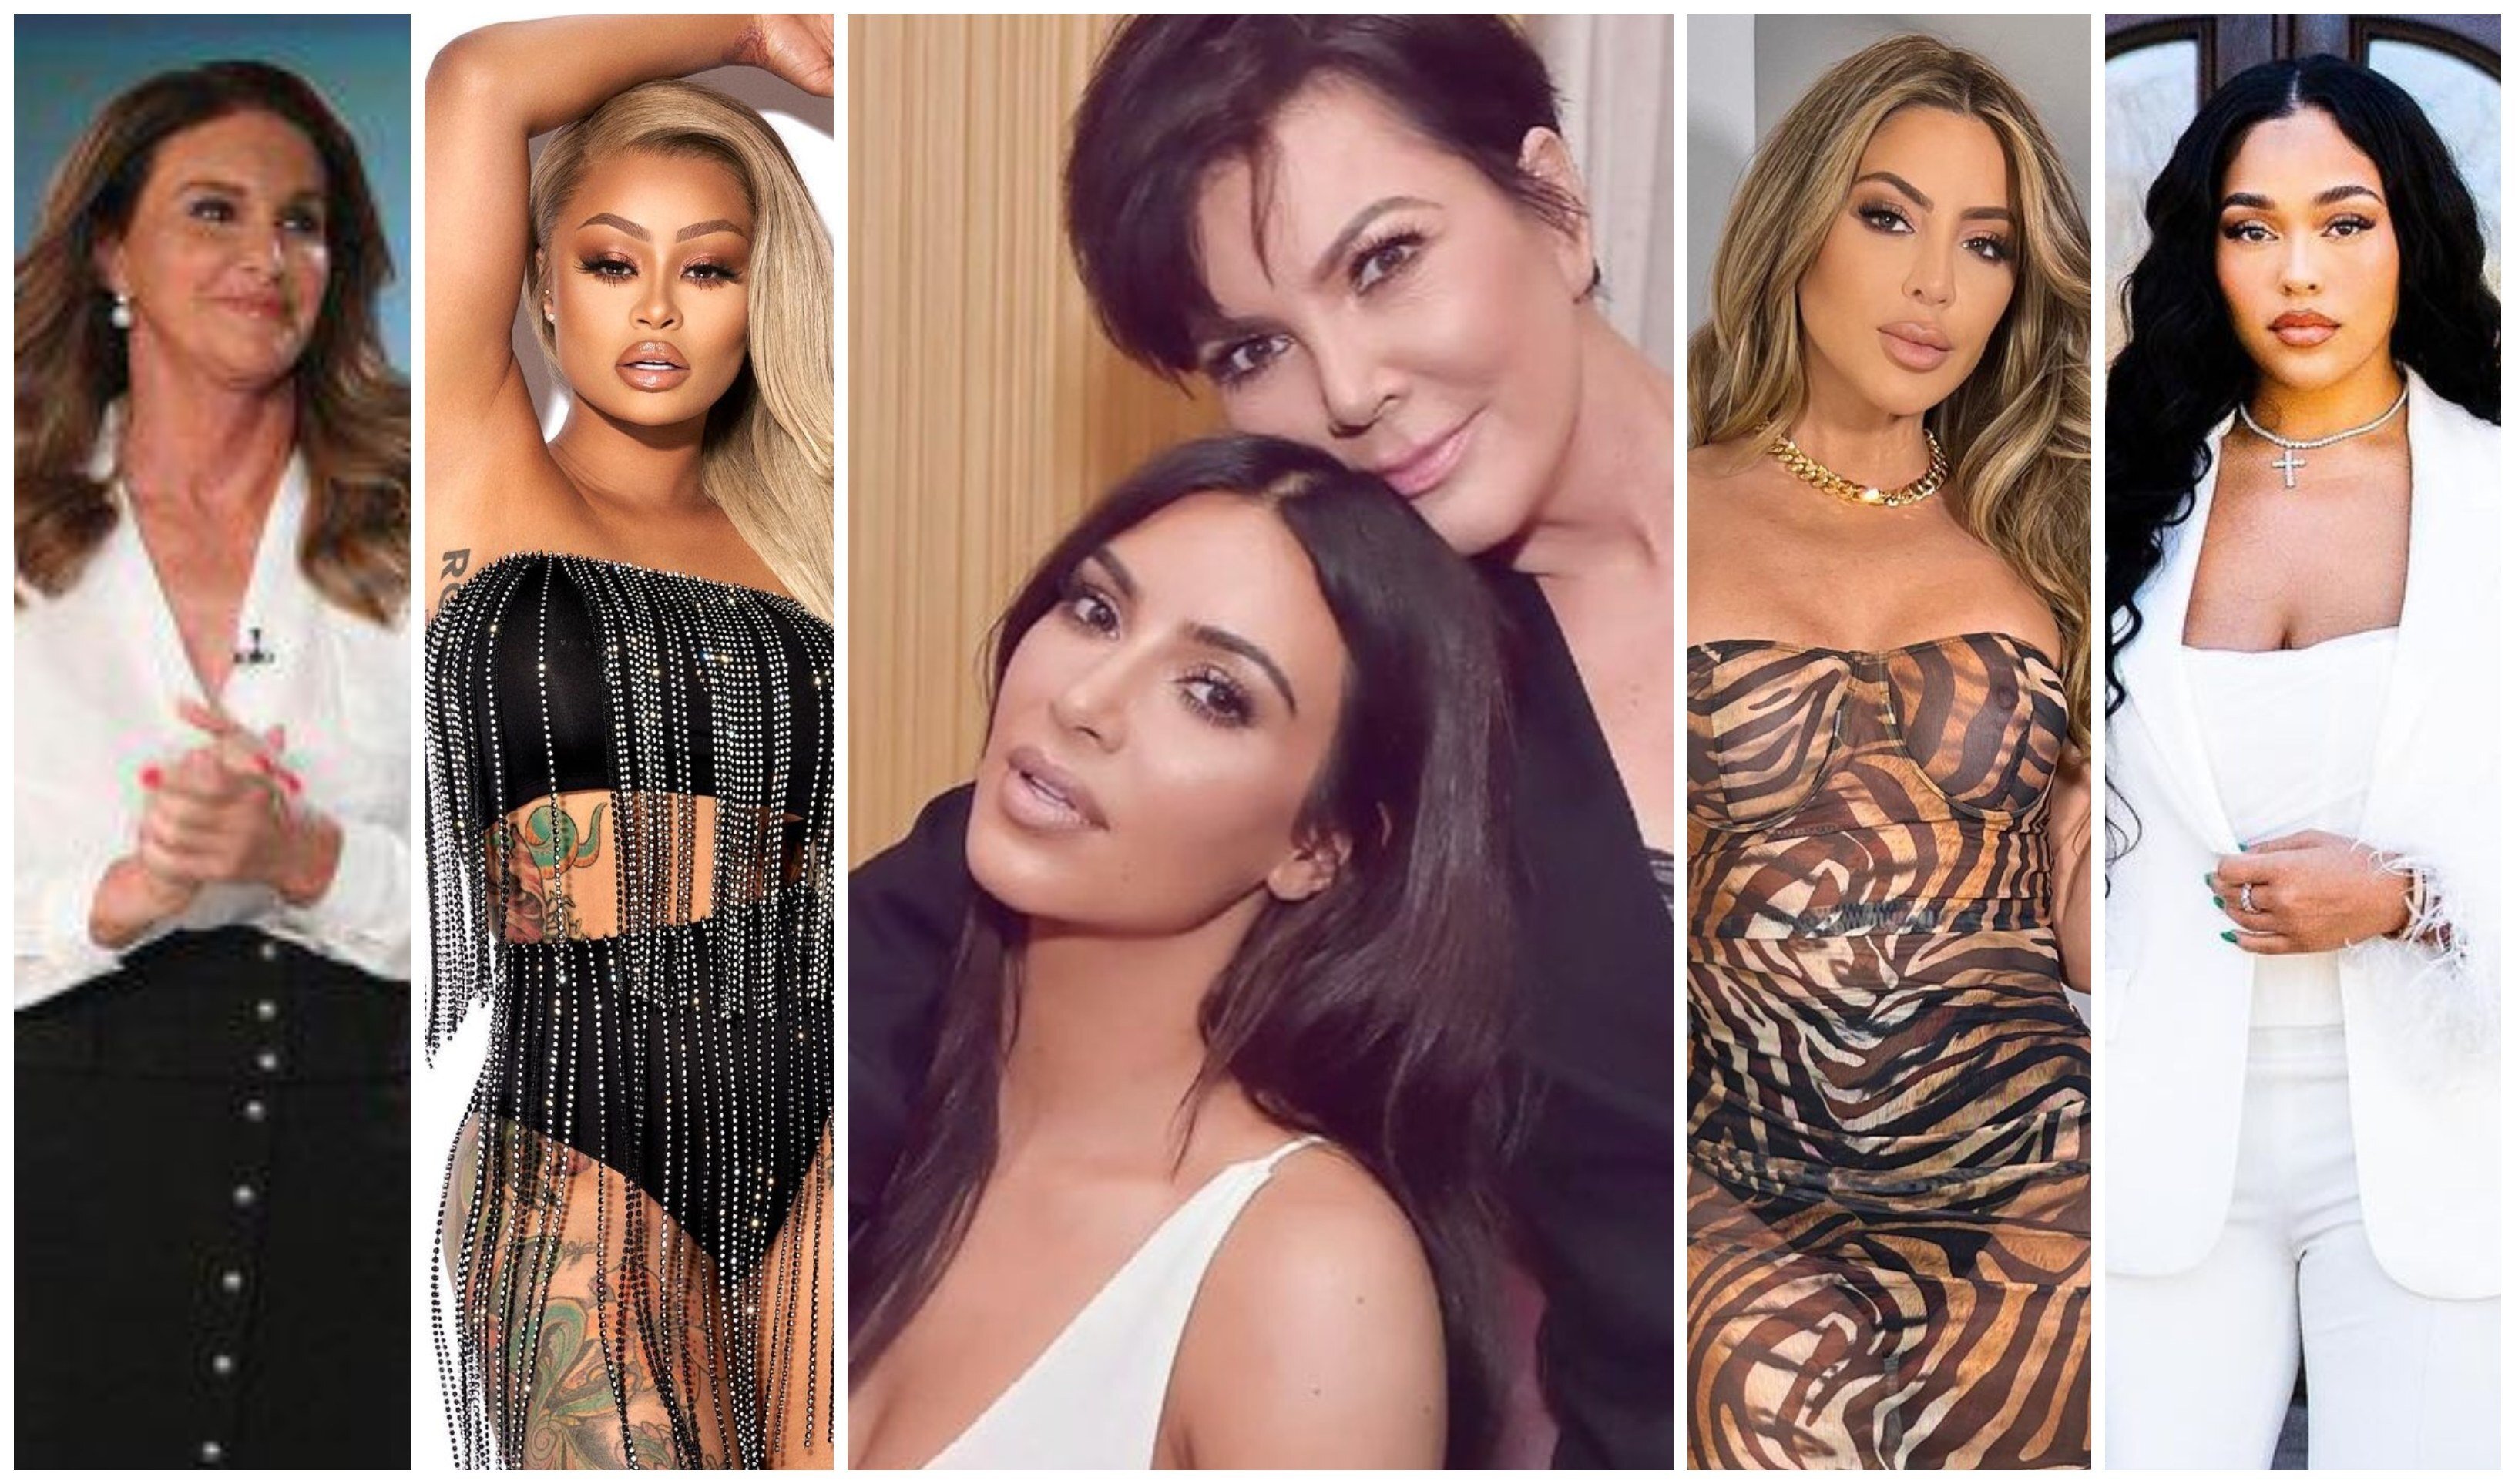 The Kardashians were close with the likes of Larsa Pippen and Blac Chyna, but things turned sour. Photo: @kimkardashian, @blacchyna, @larsapippen, @jordynwoods/Instagram